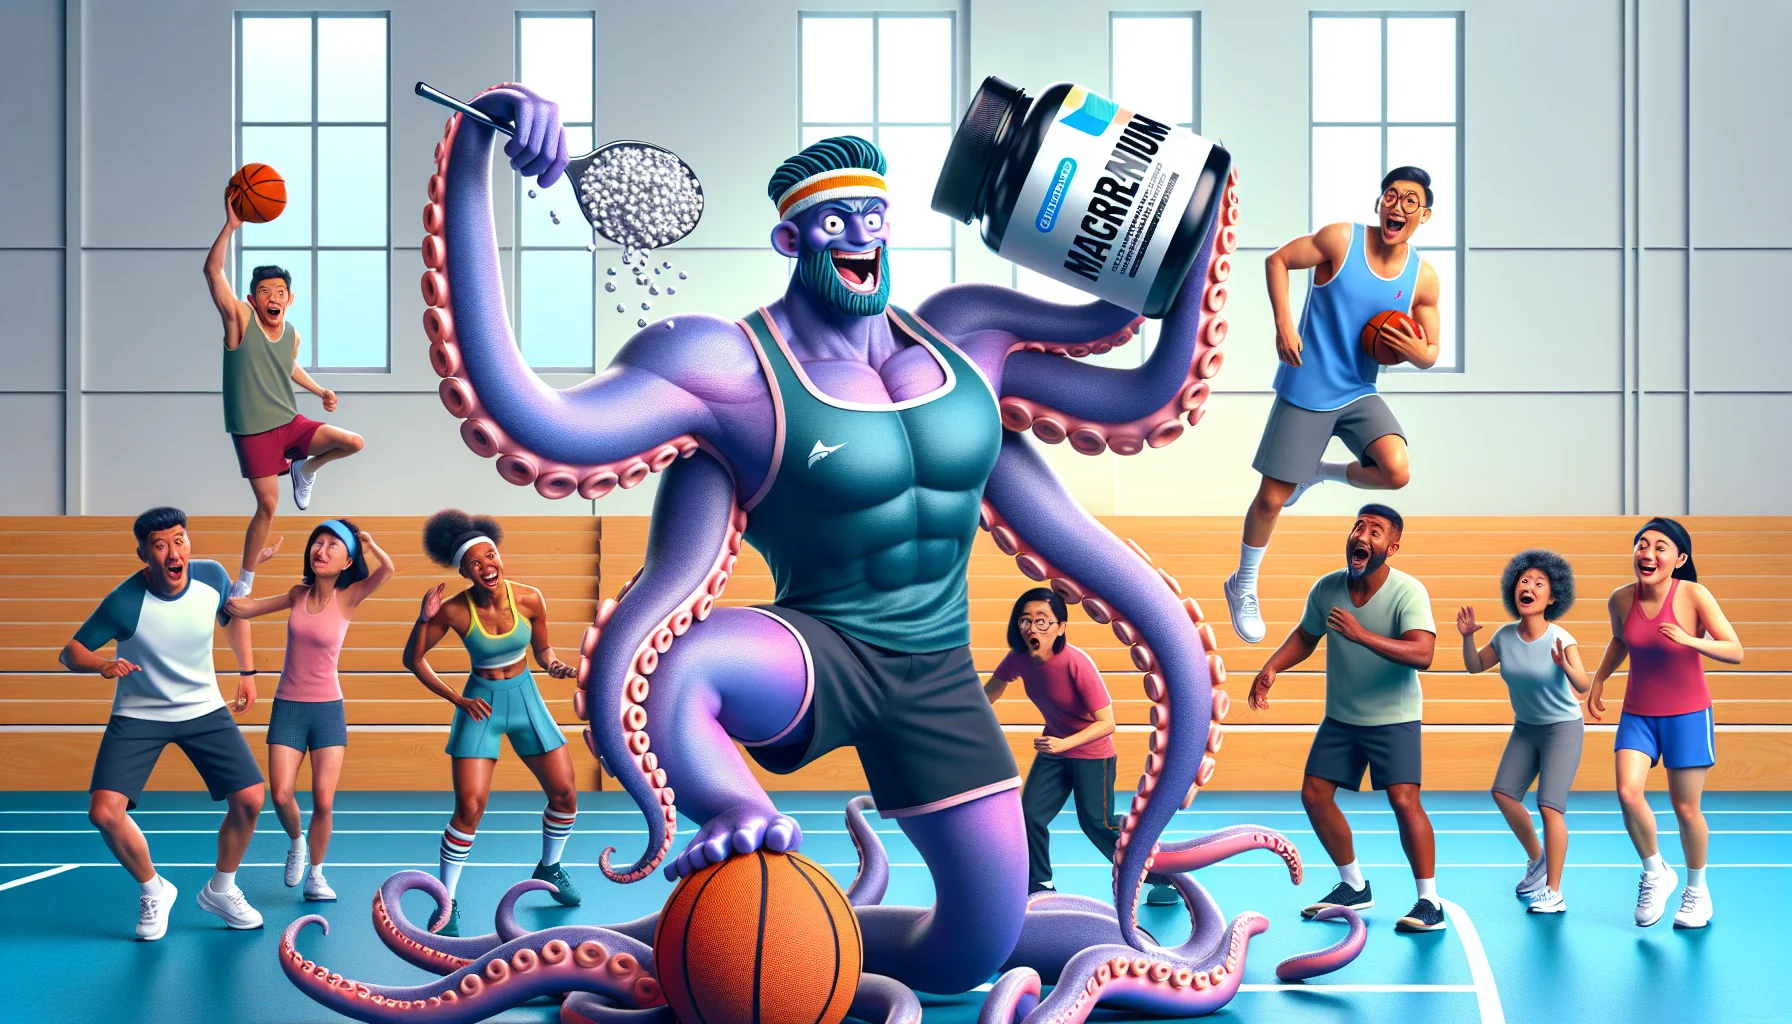 Depict an amusing scene related to sports supplements with a generic magnesium bottle replacing the 1st Phorm brand for the prop. In the foreground, there's a buff, playful male octopus, colored in shades of purple and blue. He's wearing a tennis headband and holding the magnesium bottle in one tentacle, while he's balancing on a basketball with another. He has a wide grin on his face, displaying determination. Behind him, a diverse group of people, including an Asian woman and a Black man in sportswear, watch in surprise and amusement, some even holding back laughter, signaling that the octopus is oddly inspiring them.